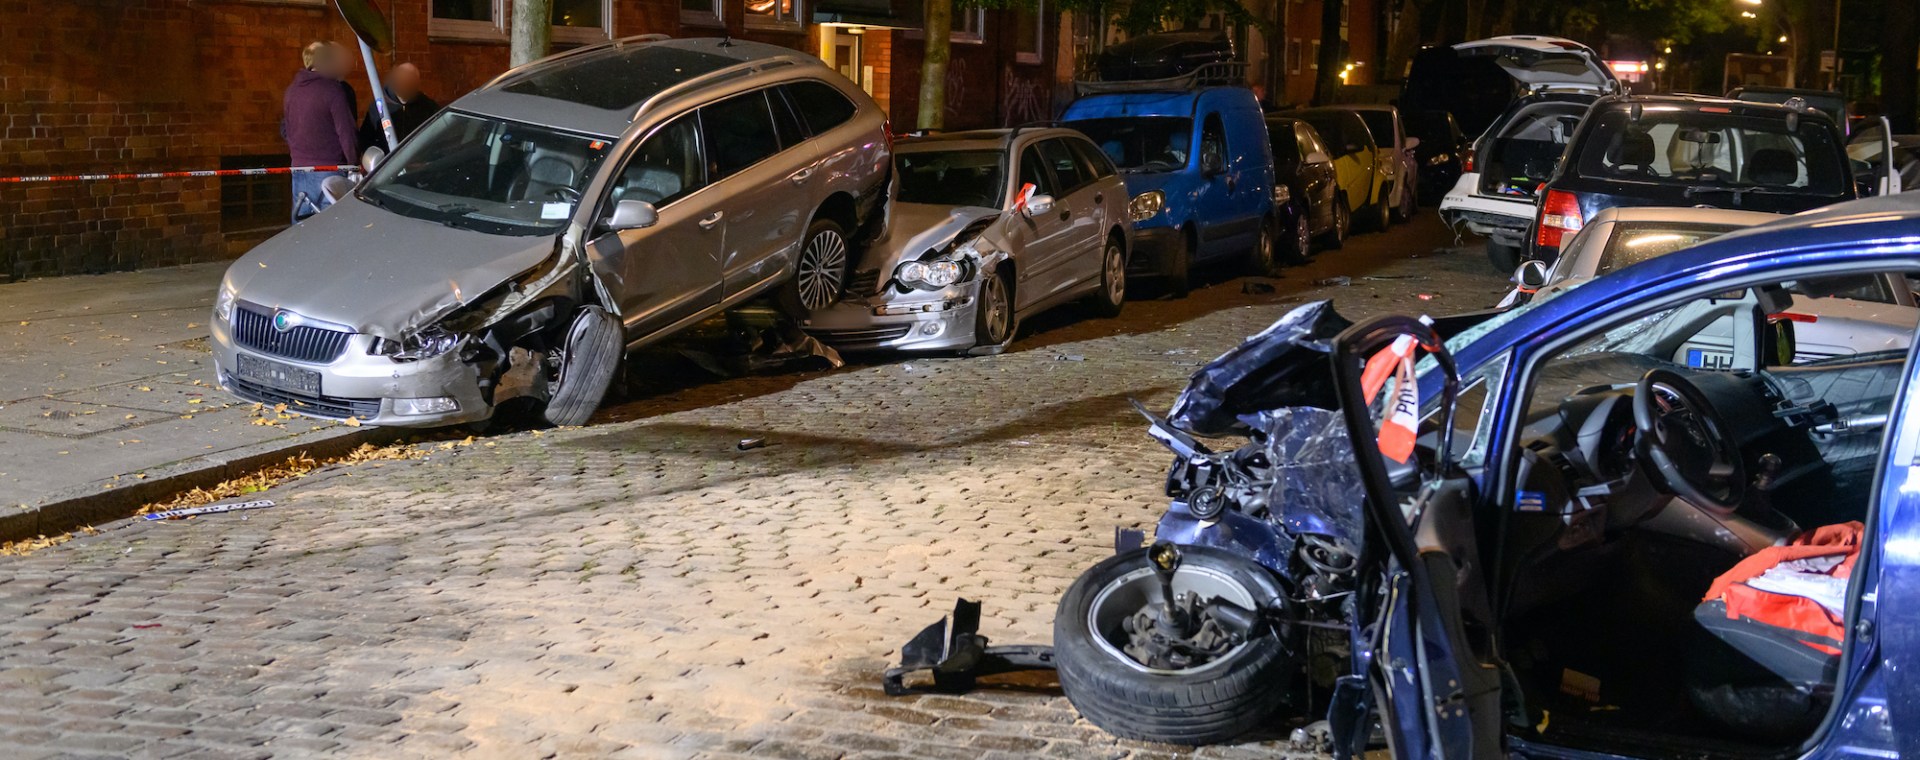 A car accident shows several wrecked cars